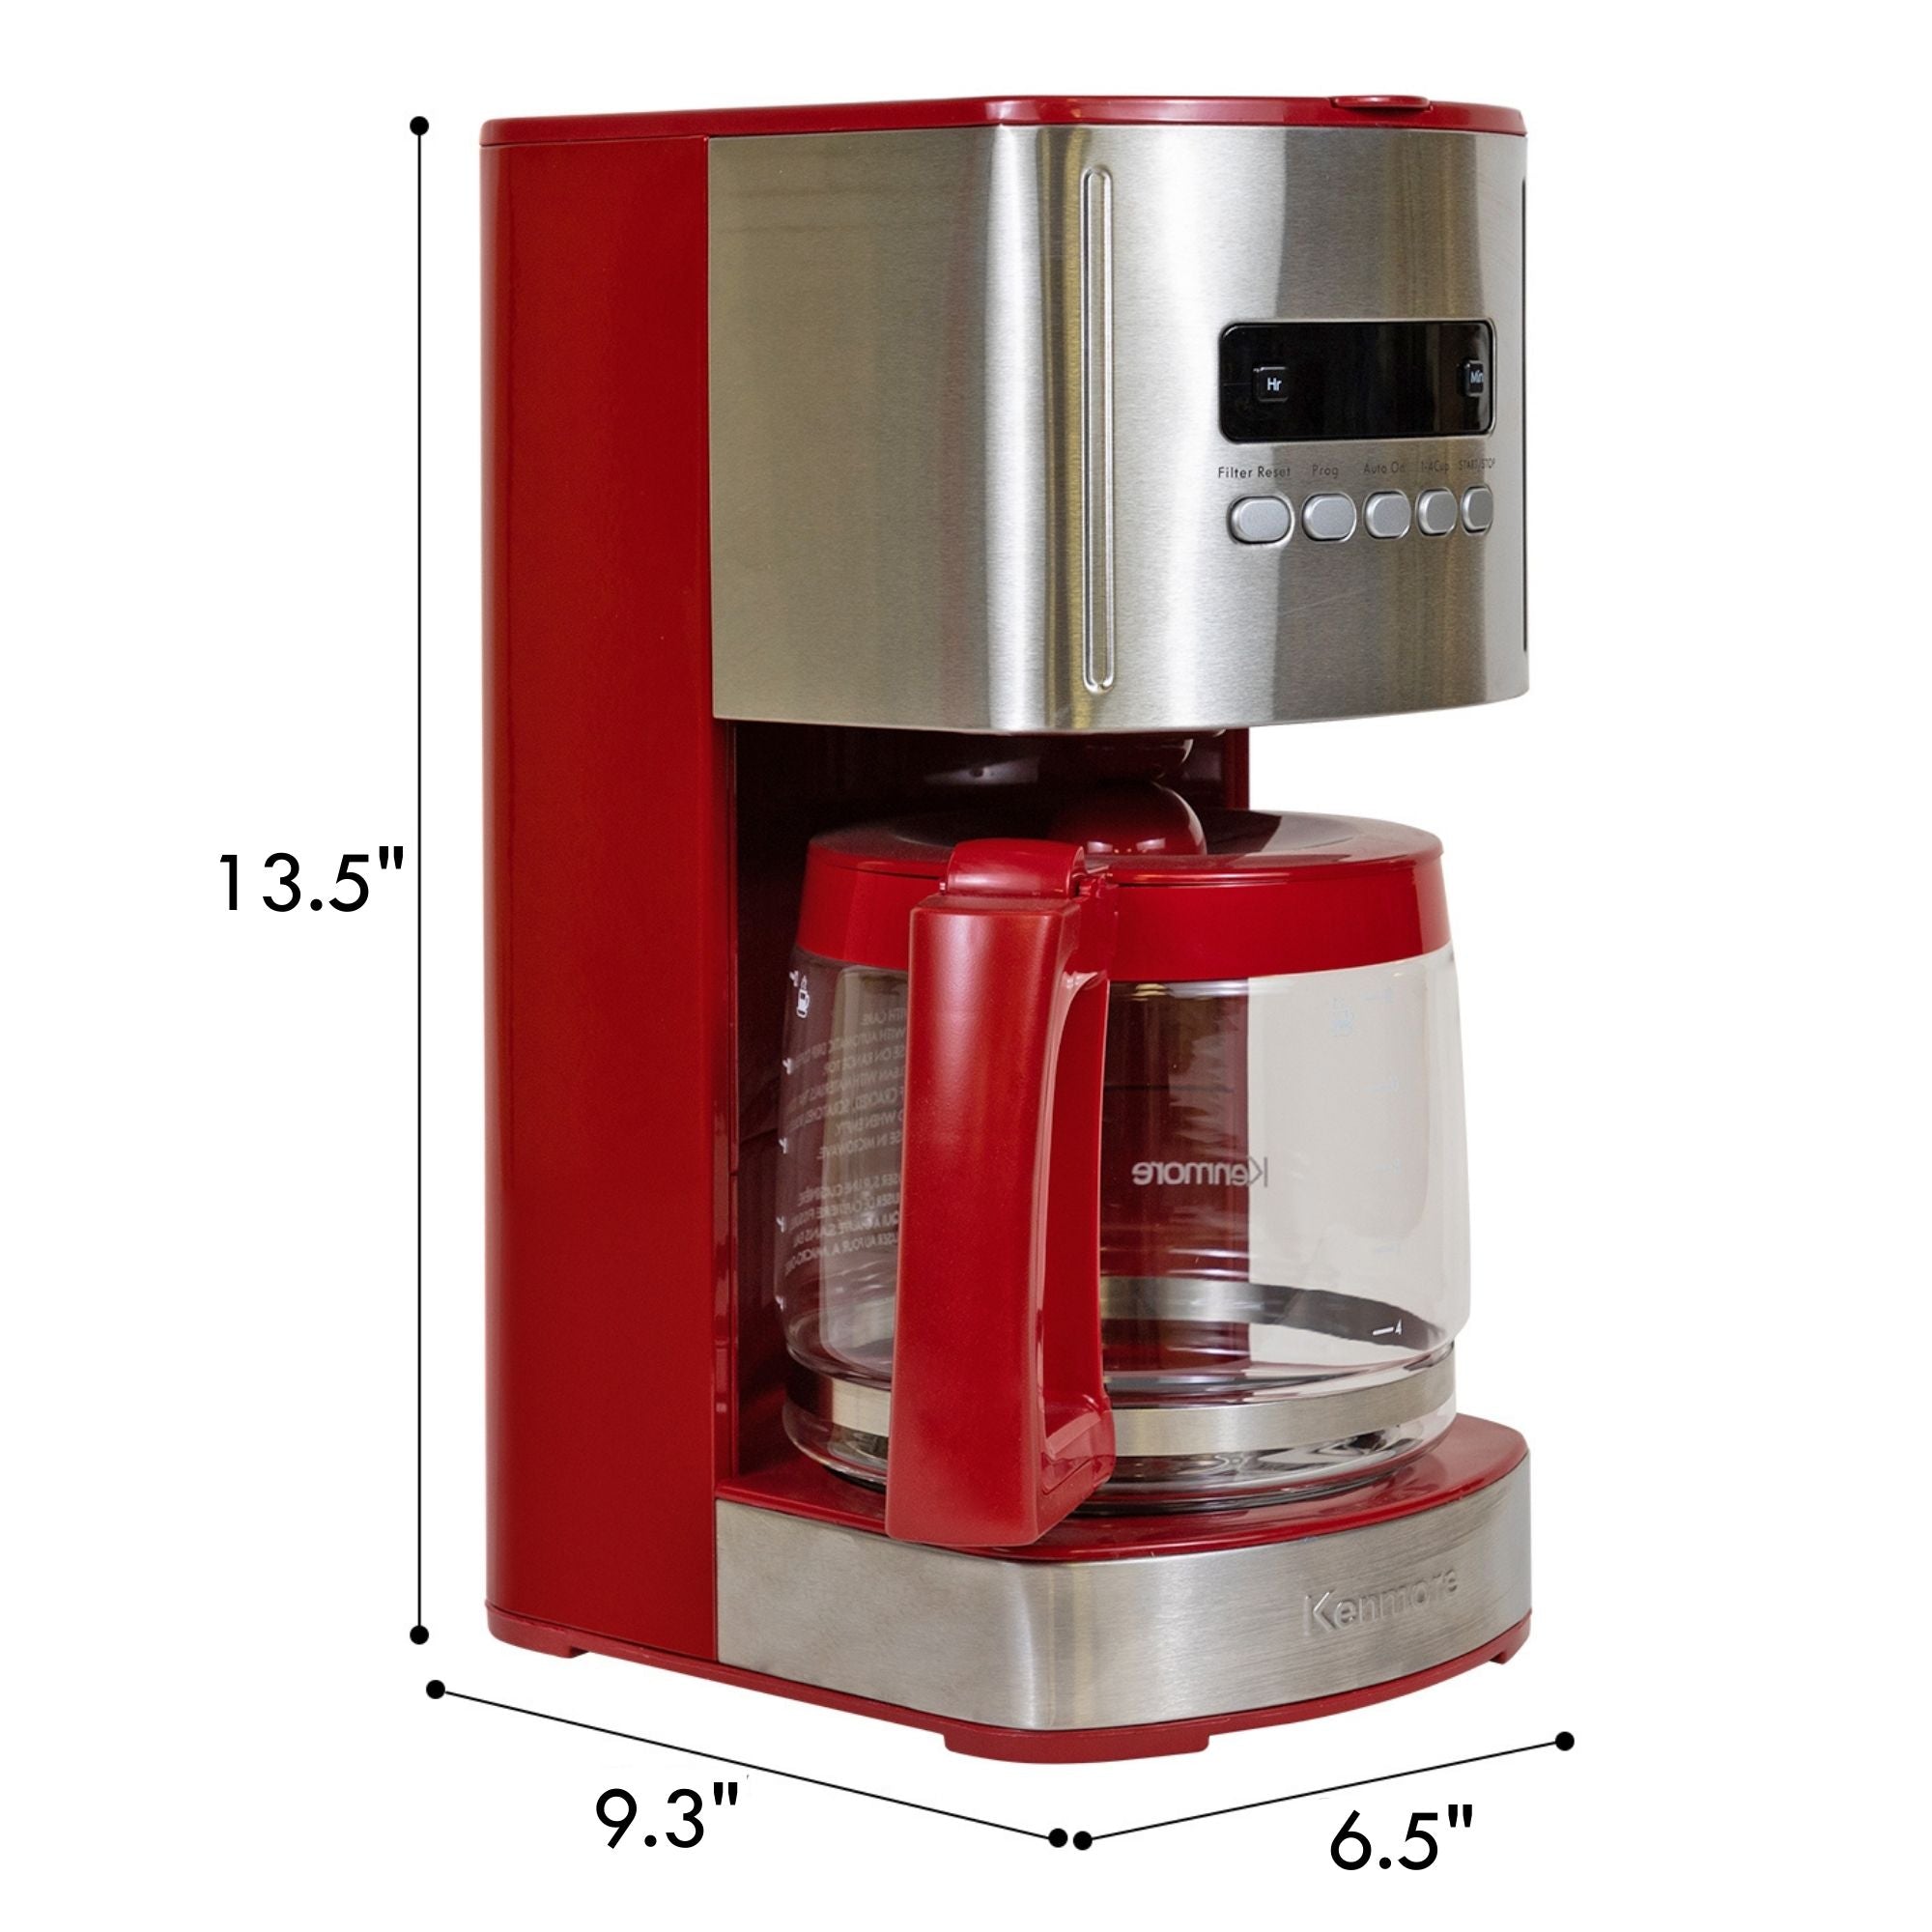 Kenmore 12 cup programmable coffeemaker on a white background with dimensions labeled